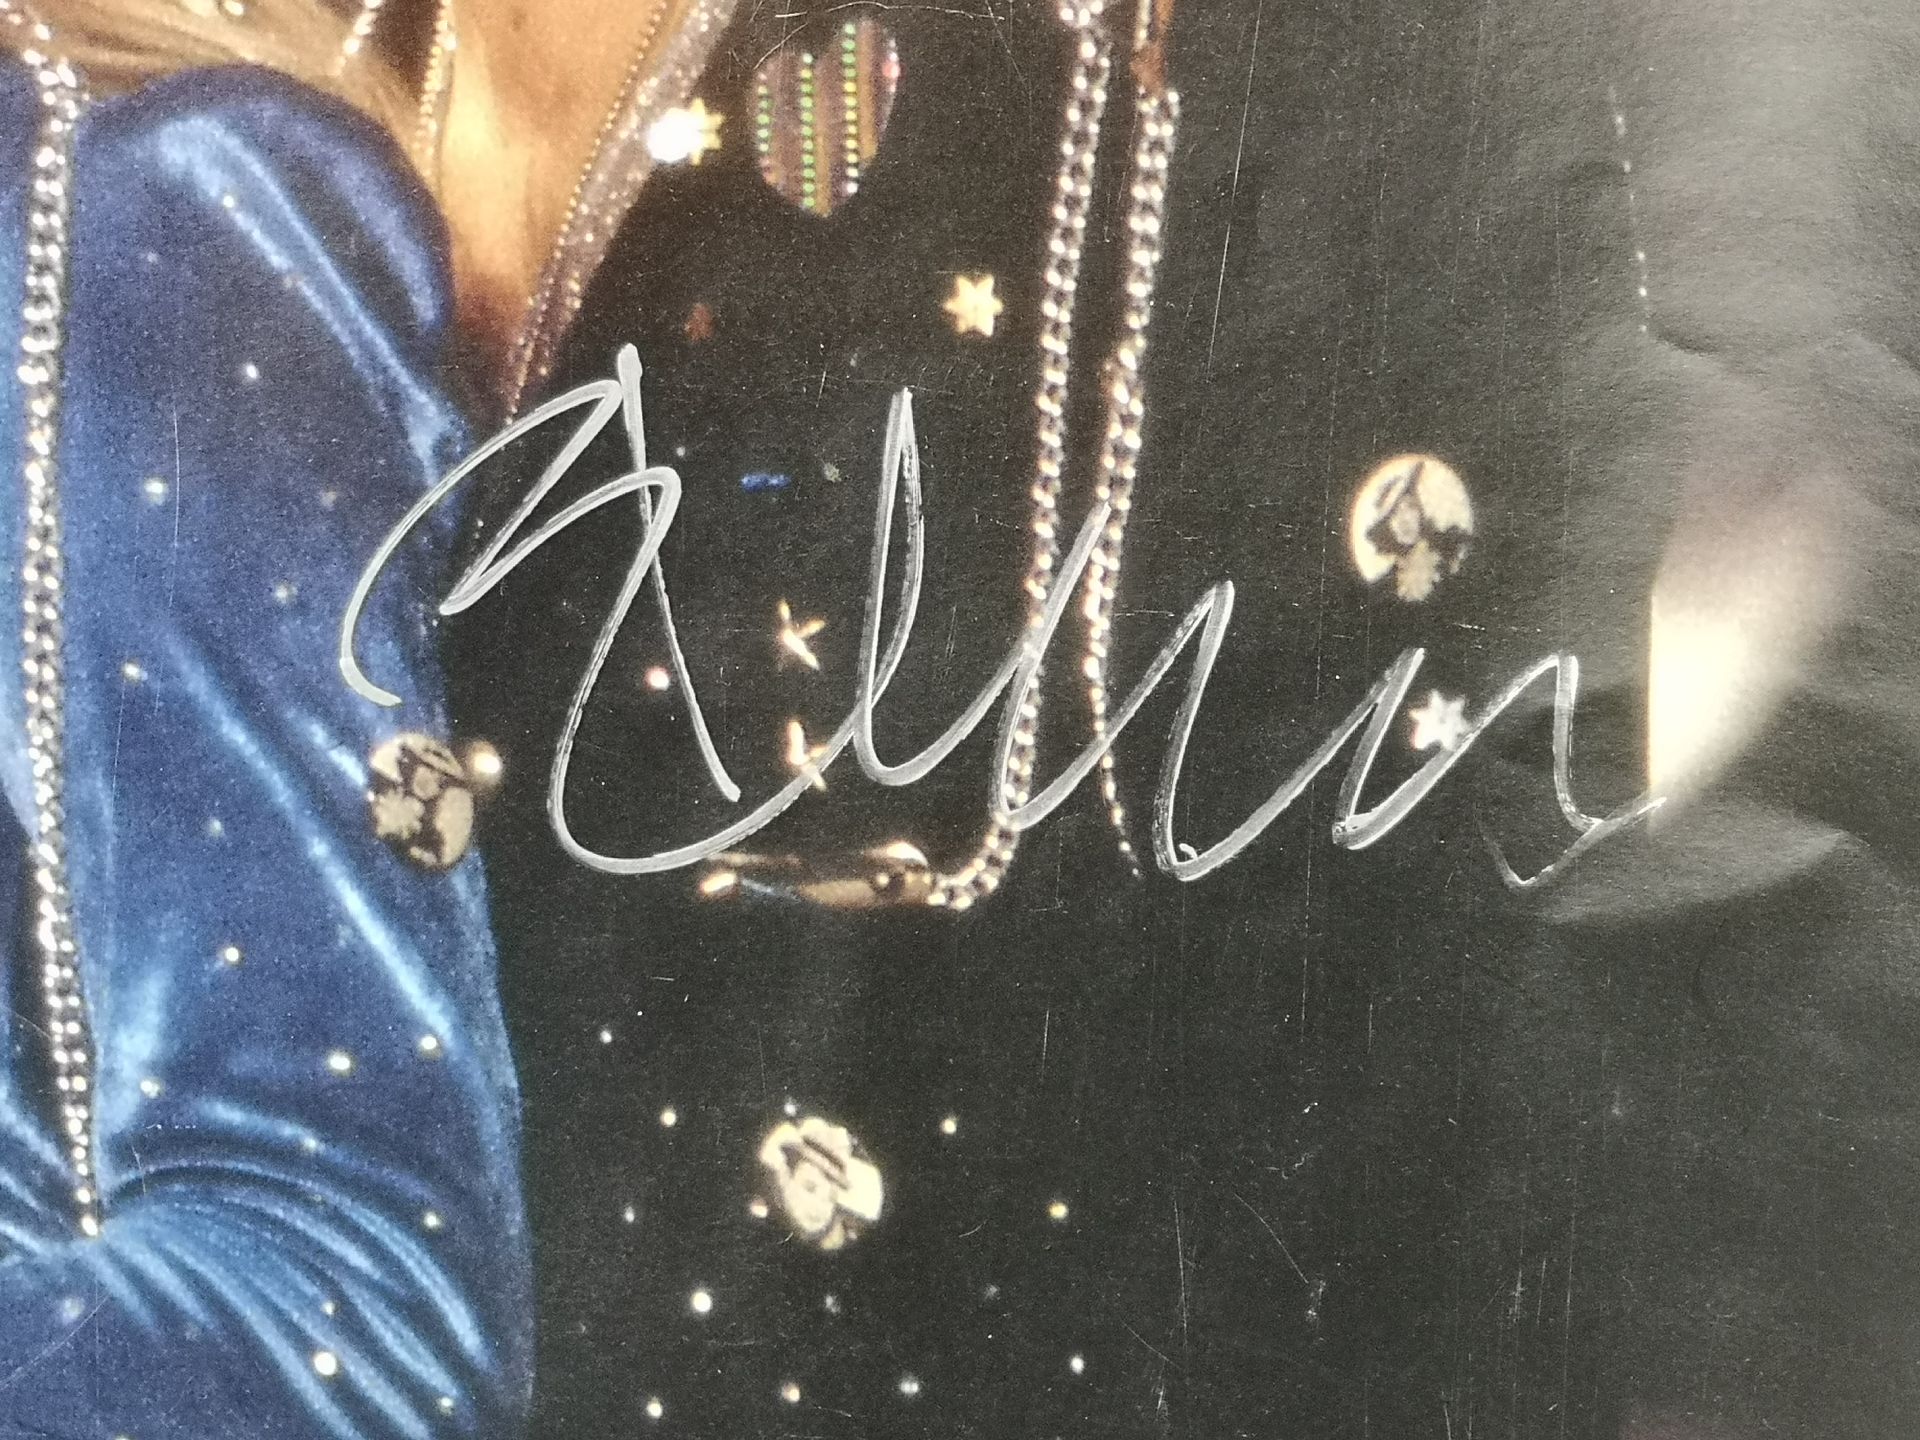 Abba poster with signatures - Image 7 of 7